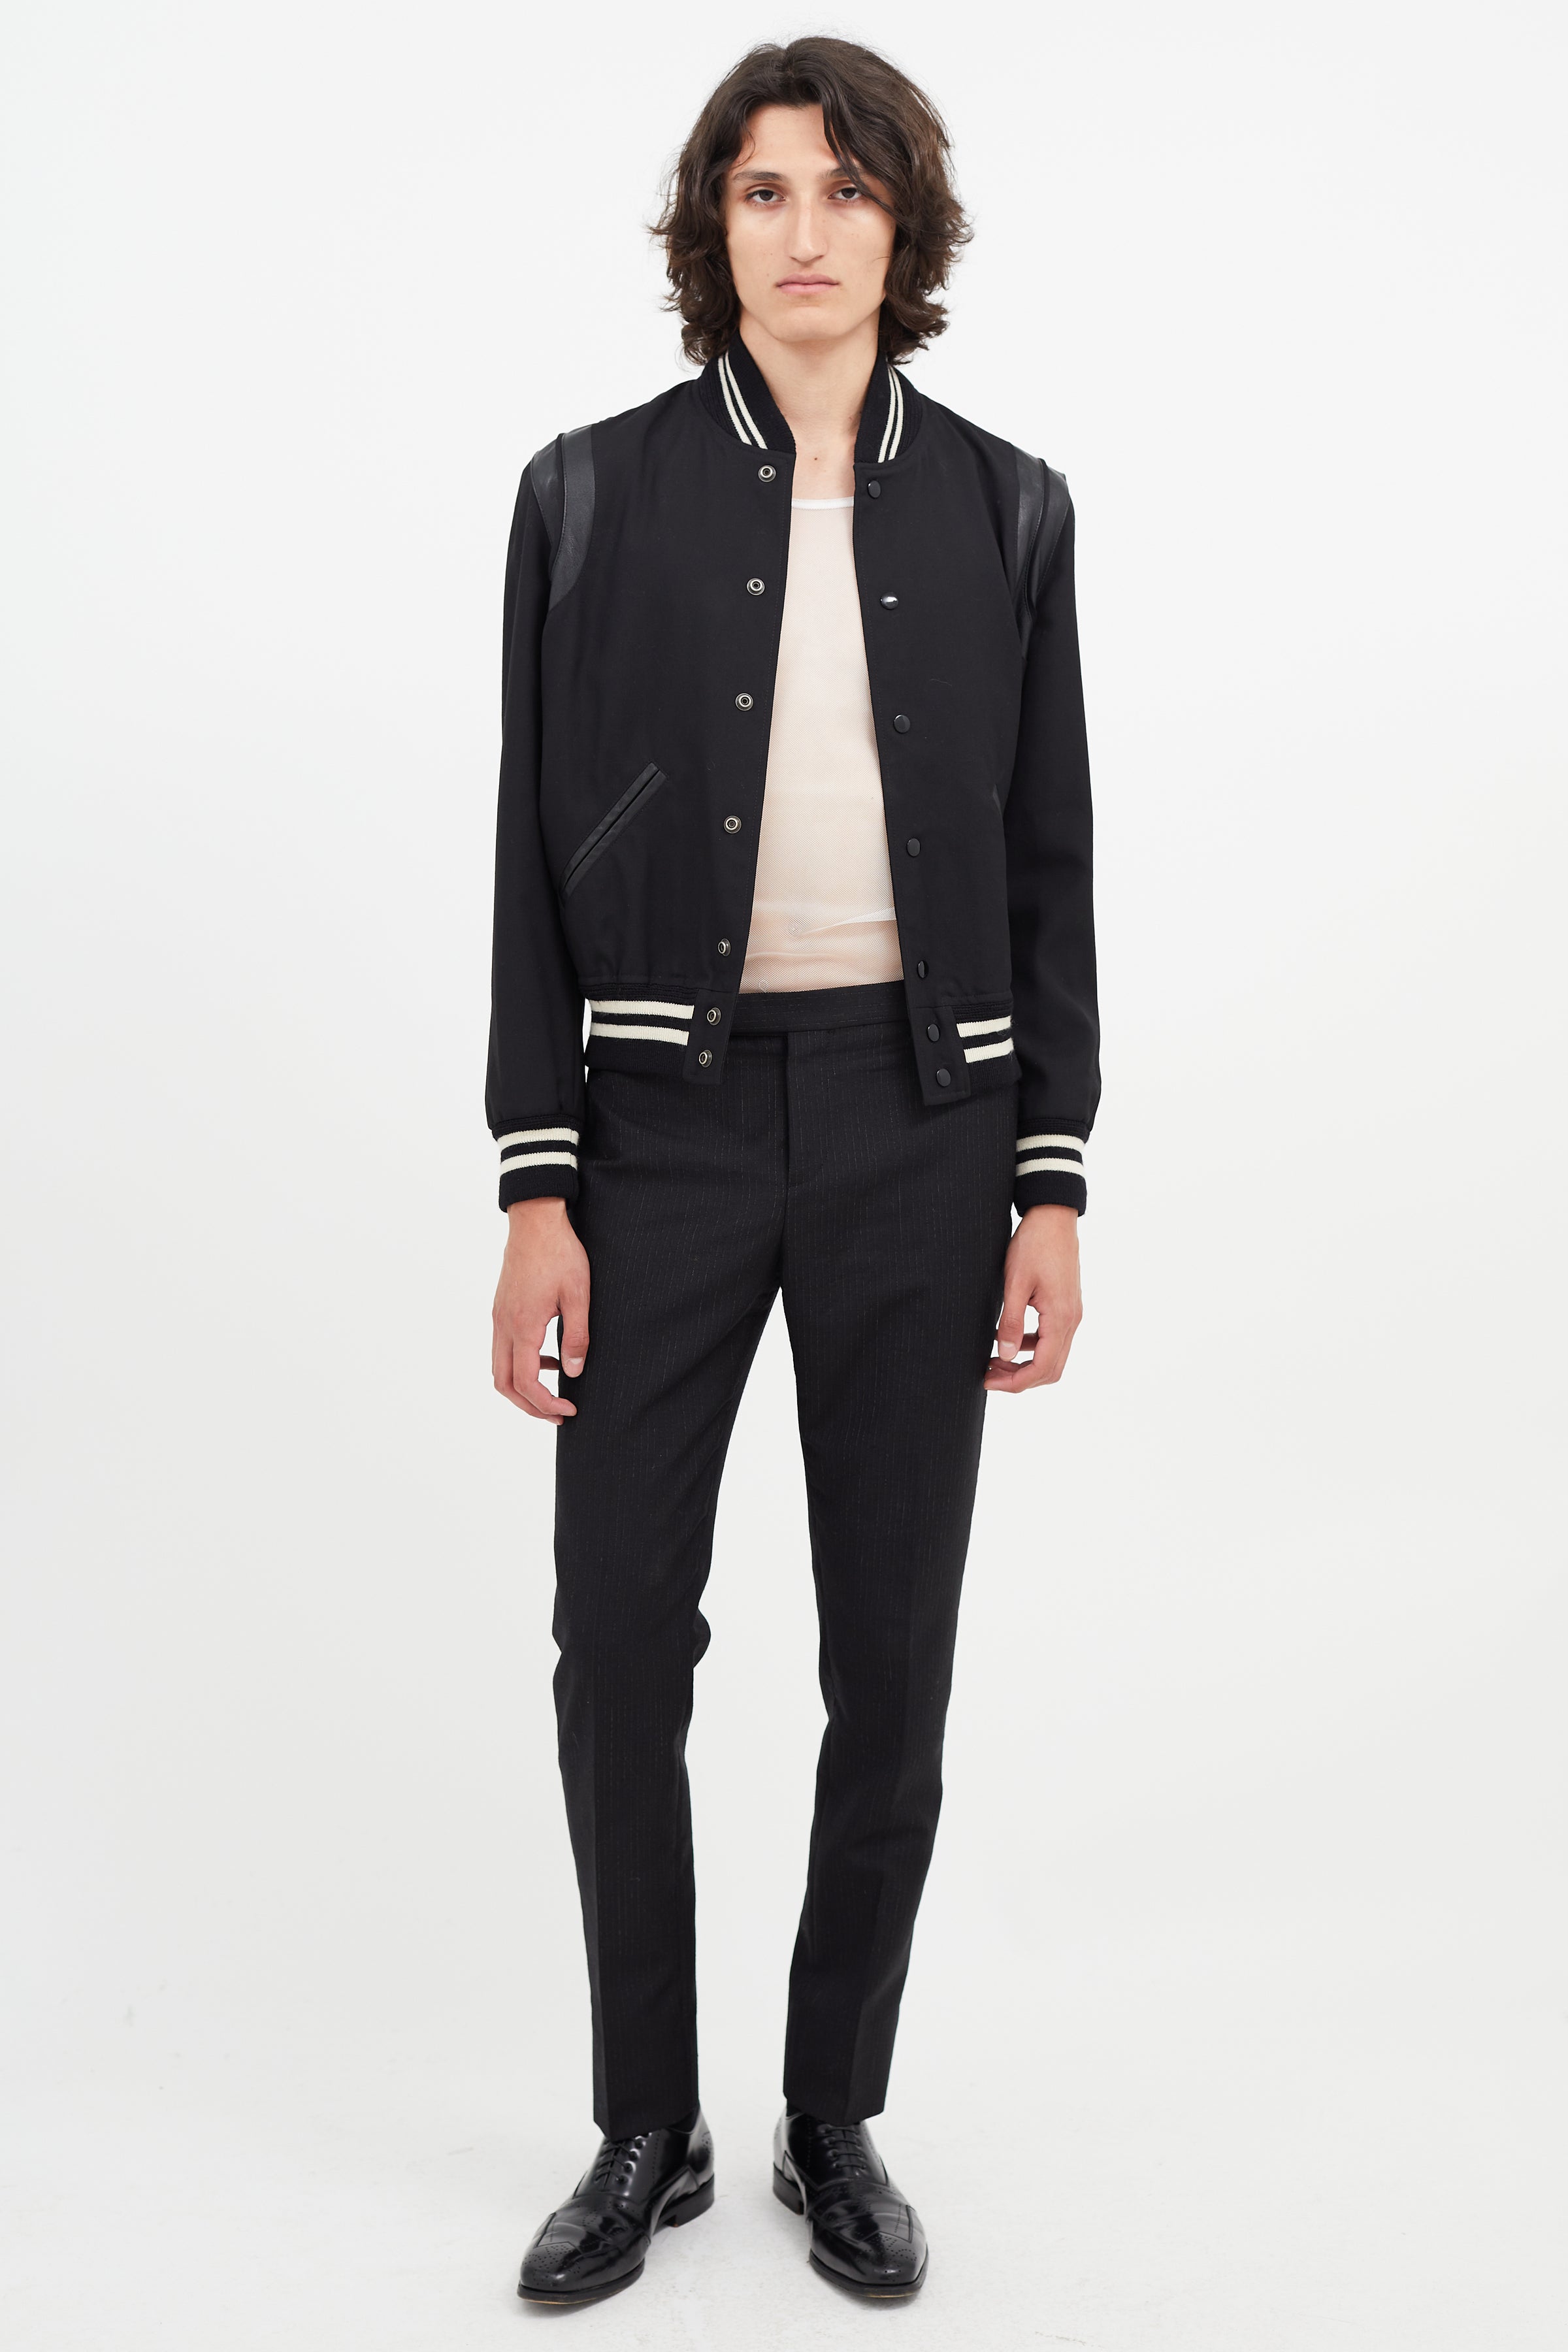 Saint Laurent 2014 Fall/Winter Collection | Leather jacket style, Jackets,  Leather jacket men